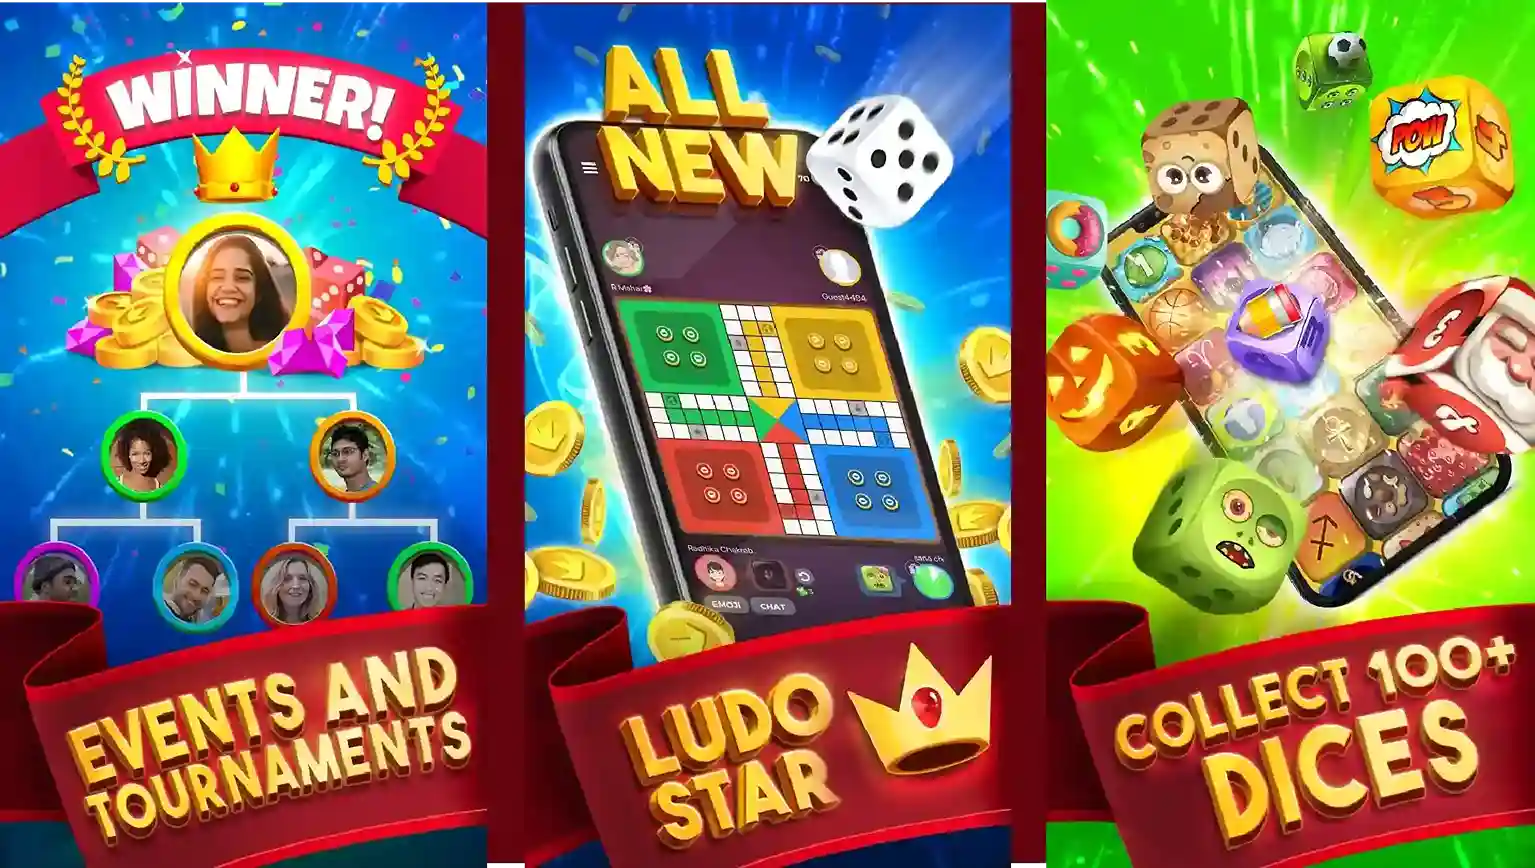 About Ludo Star_11zon